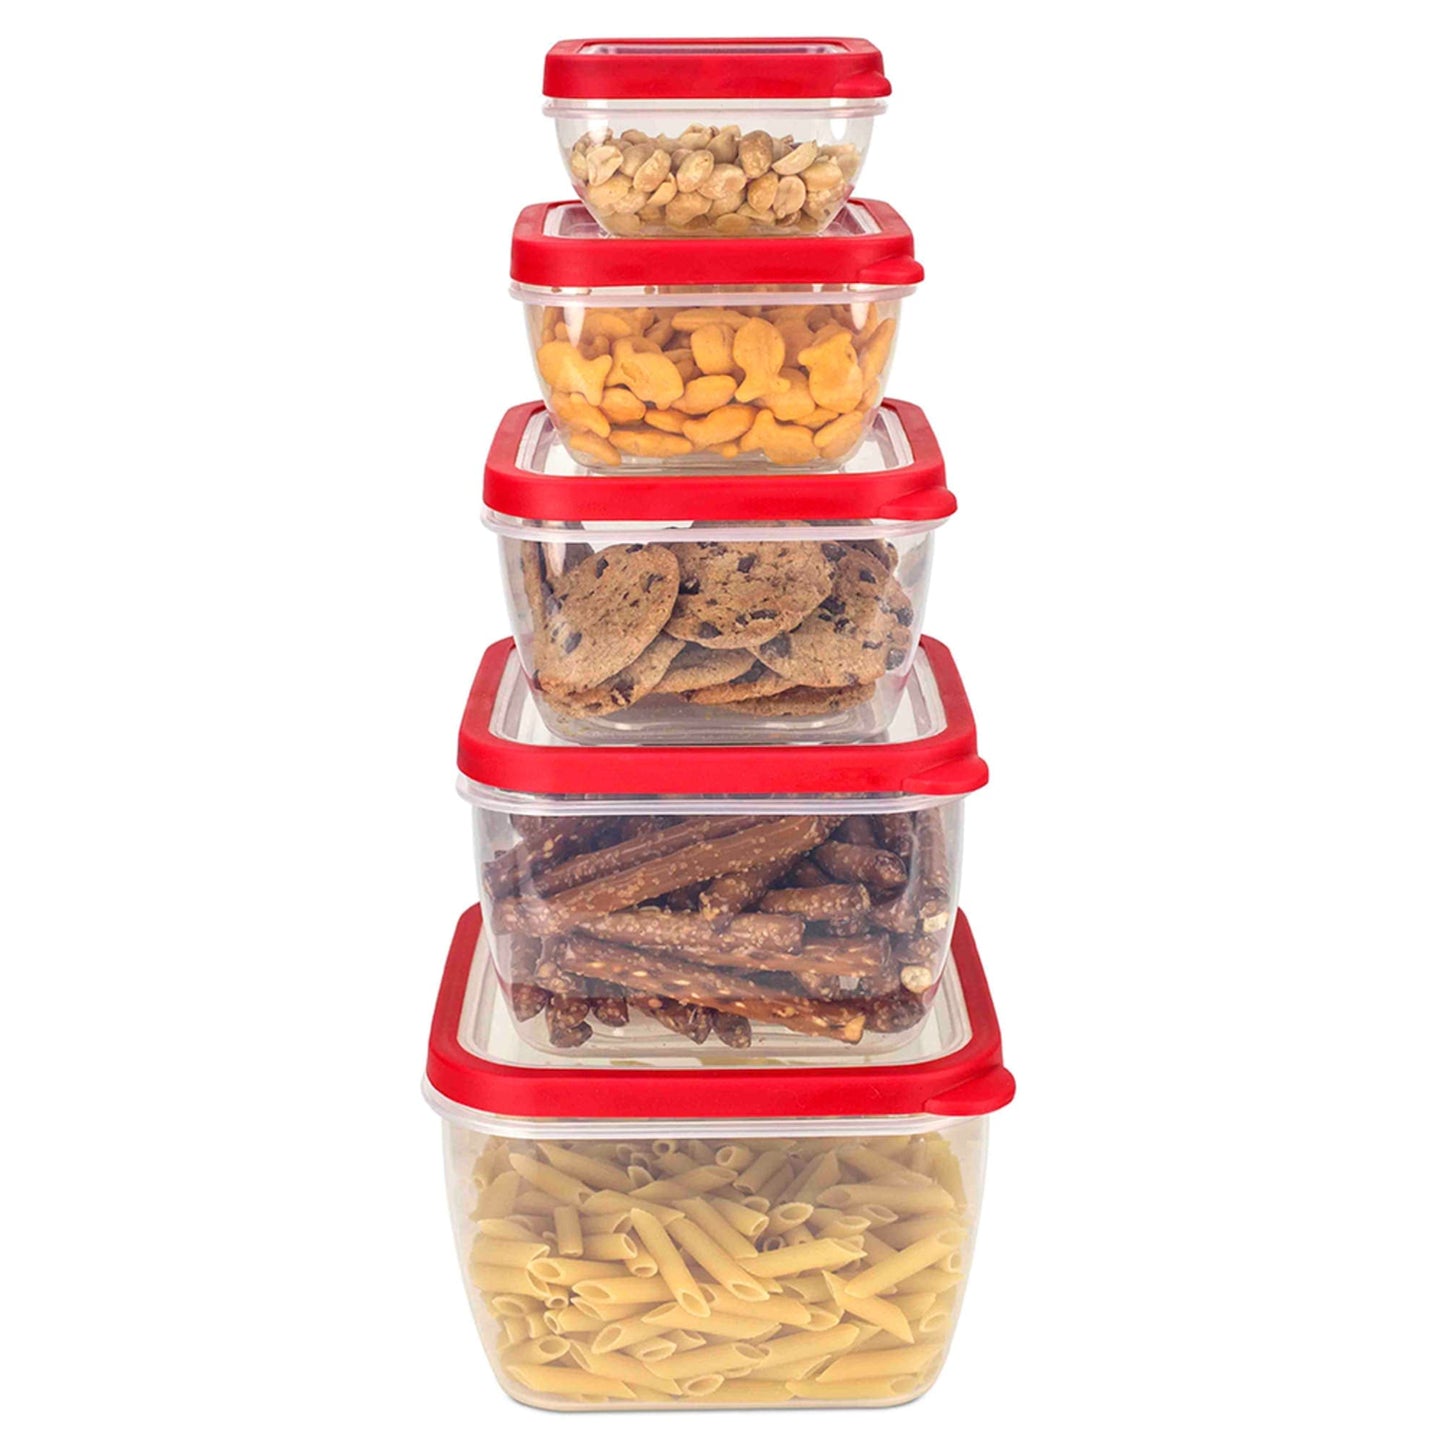 5 Piece Spill-Proof Square Plastic Food Storage Container with Ventilated, Snap-On Lids, Red